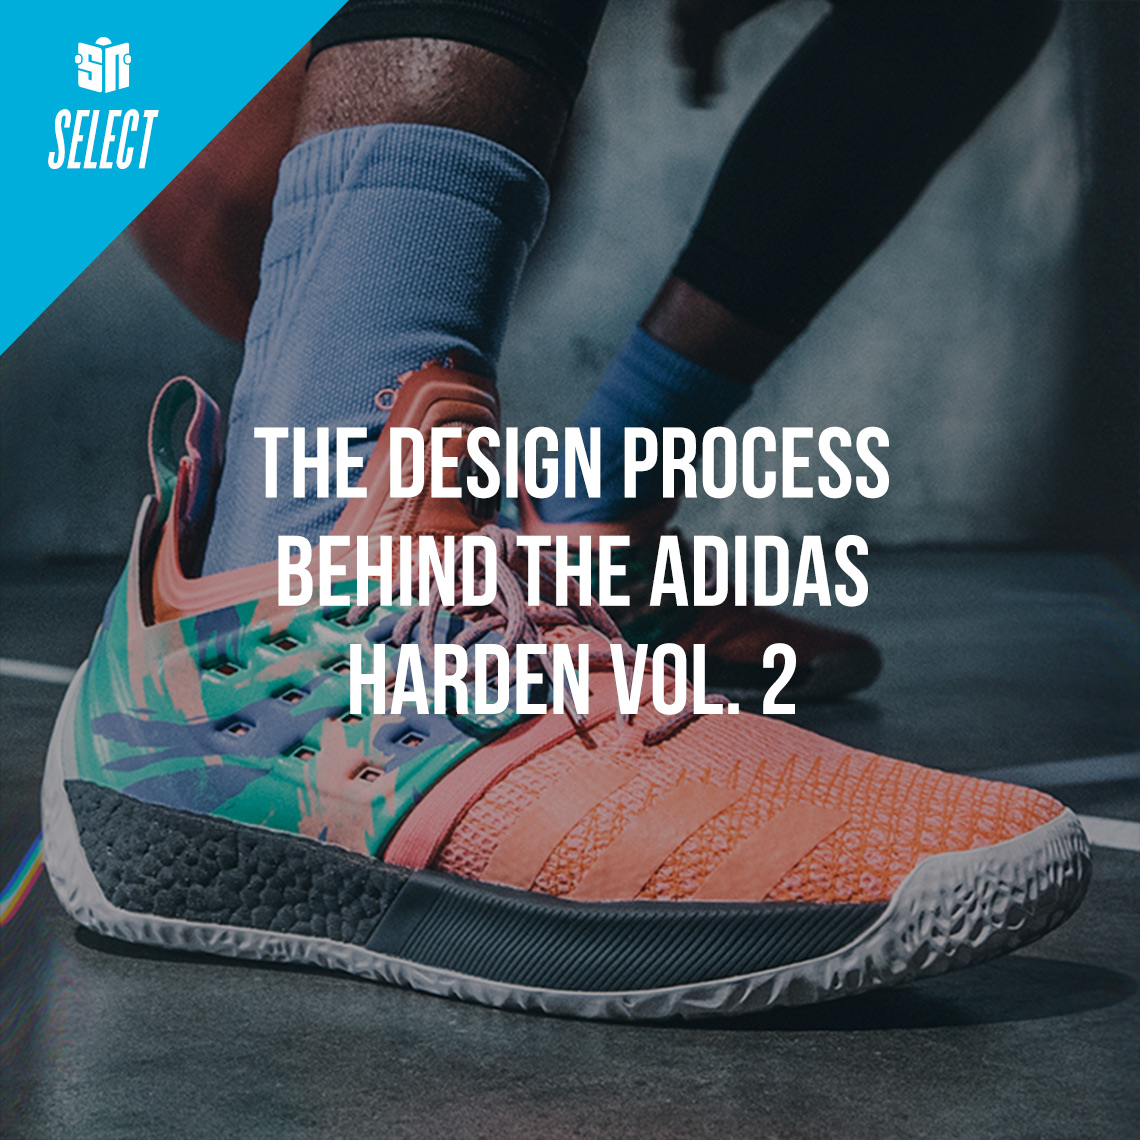 The Design Process Behind The adidas Harden Vol. 2